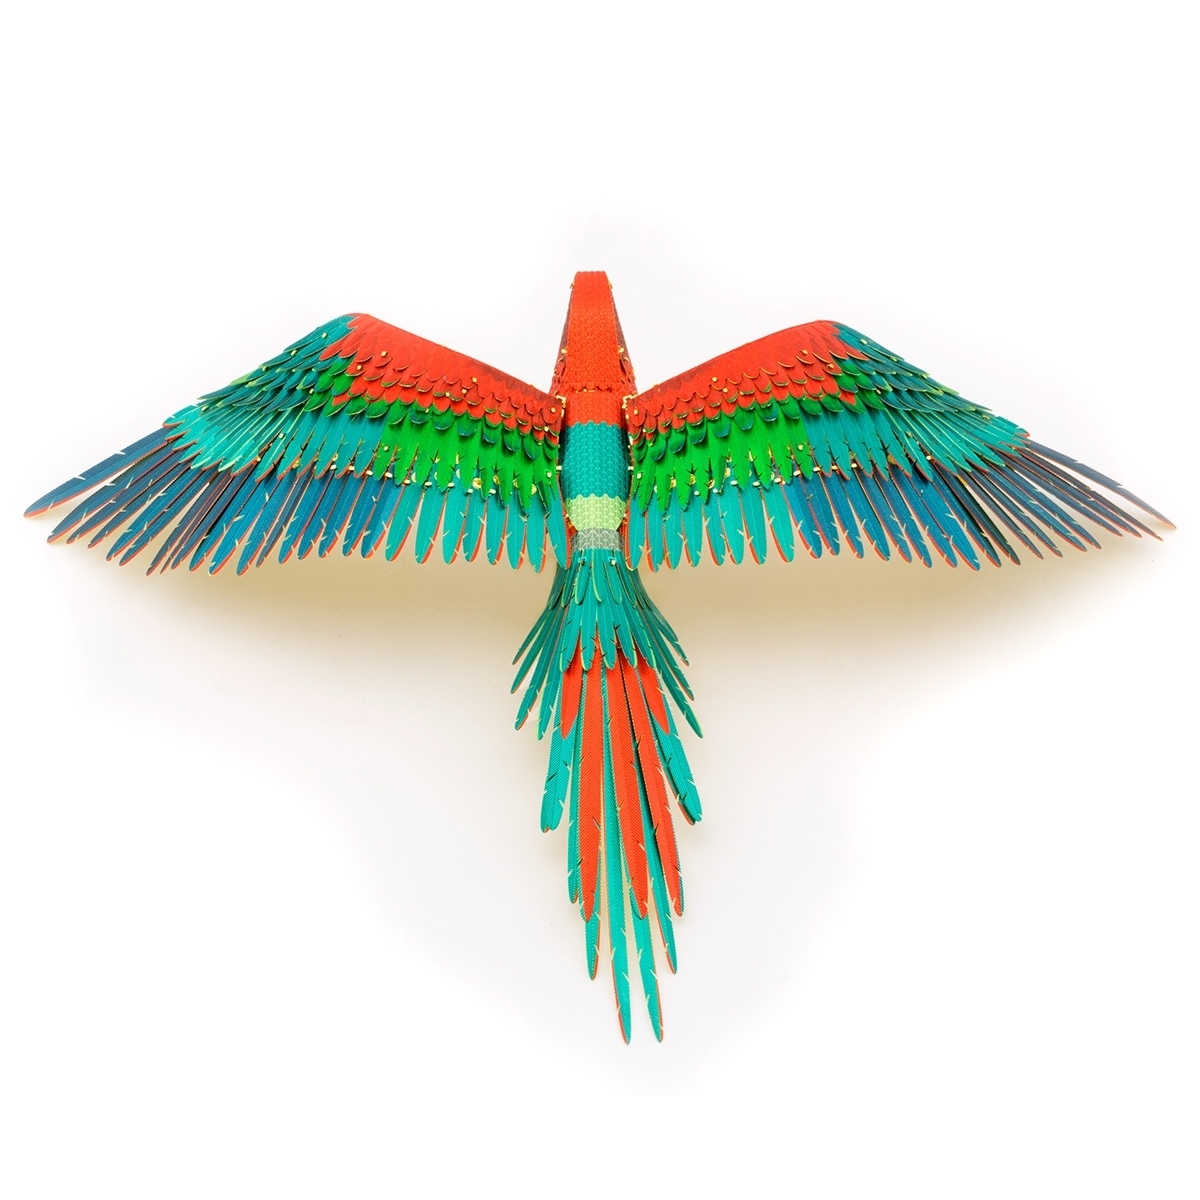 Fascinations Peacock Metal Earth ICONX 3d Bird Model Kit ICX112 for sale online 